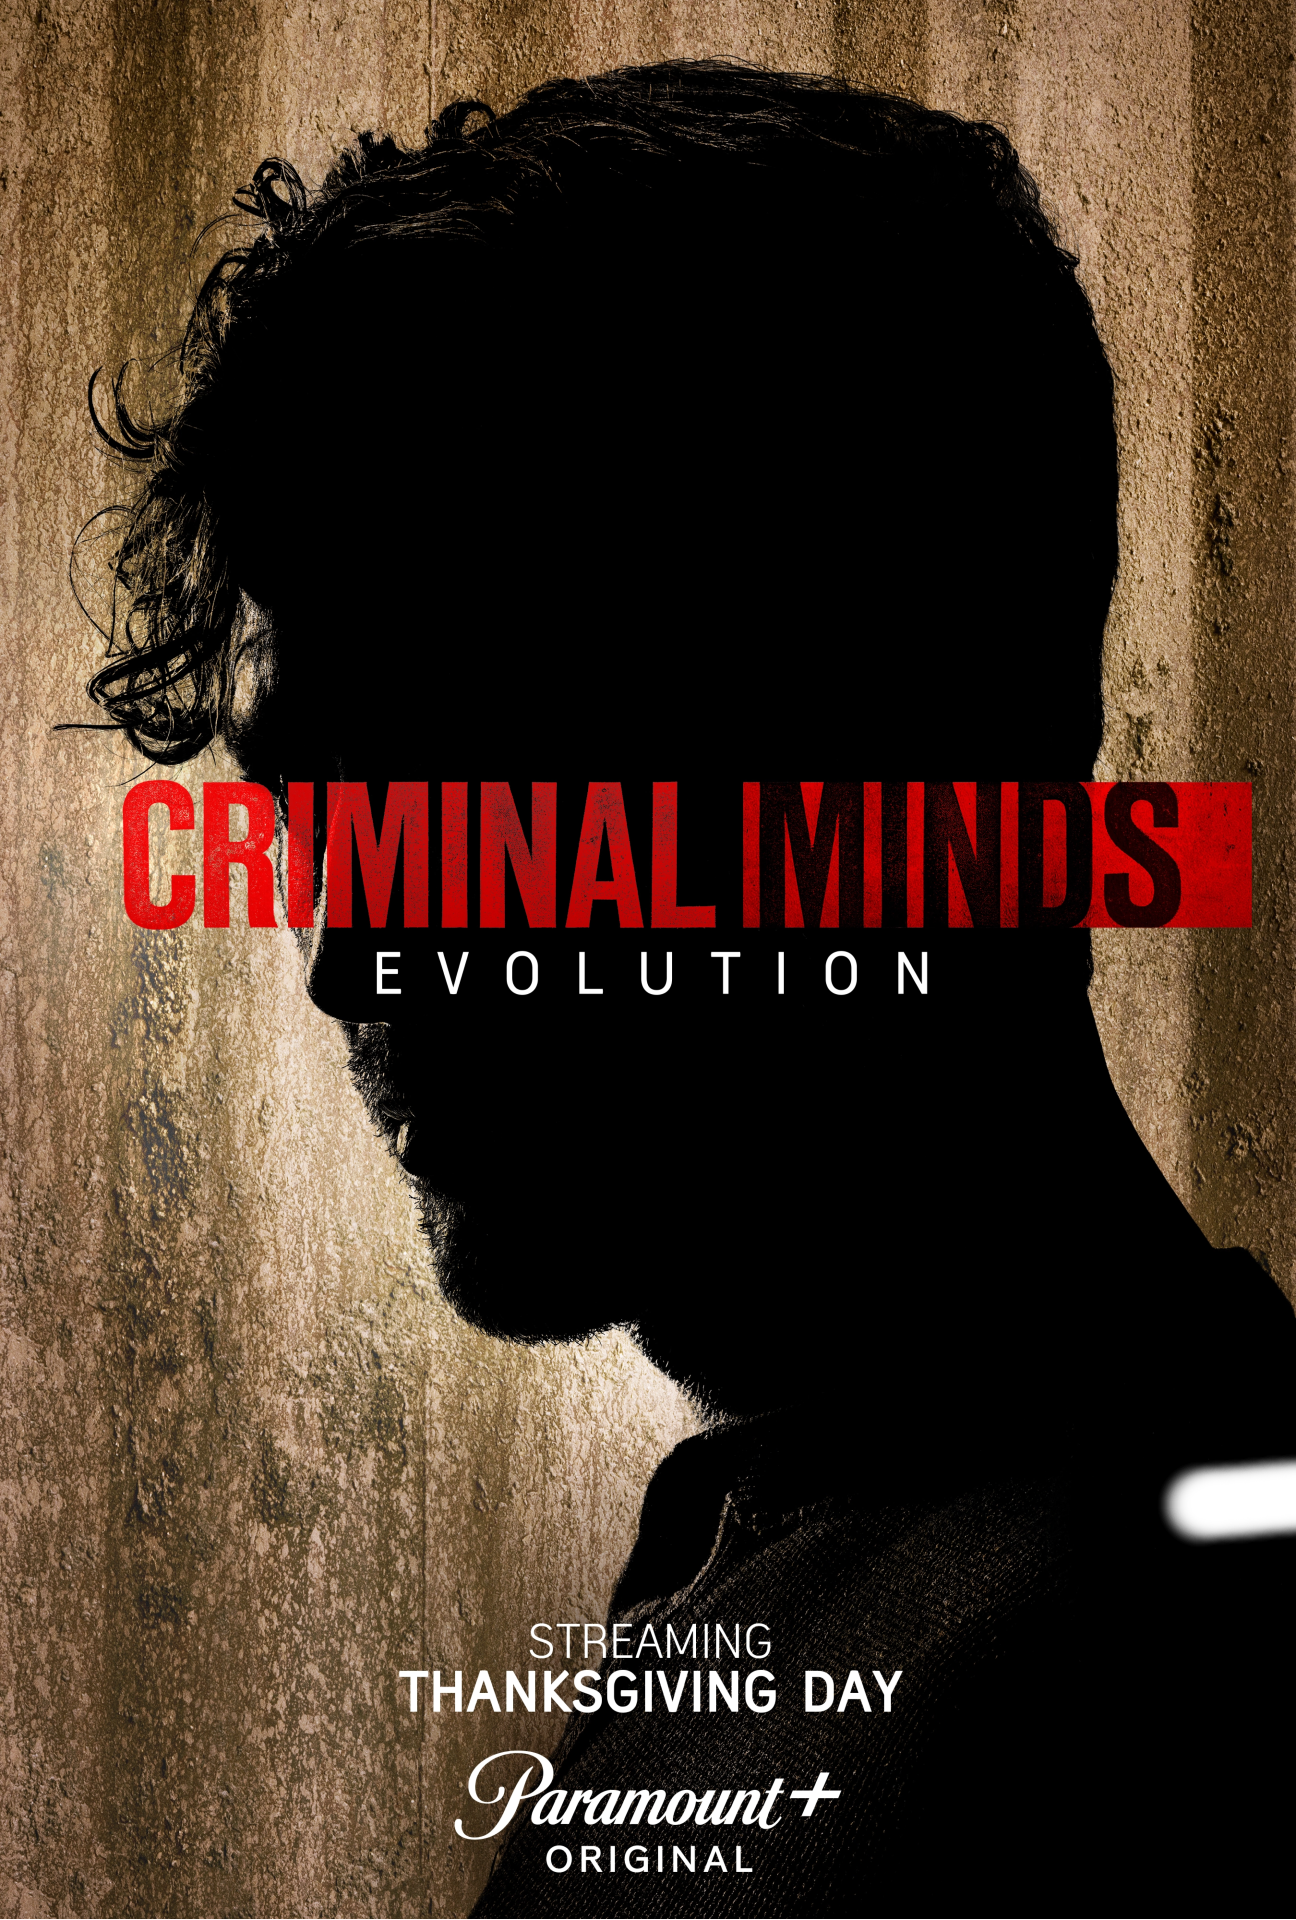 Criminal Minds Season 16 UnSub Identity Confirmed In Eerie New Poster